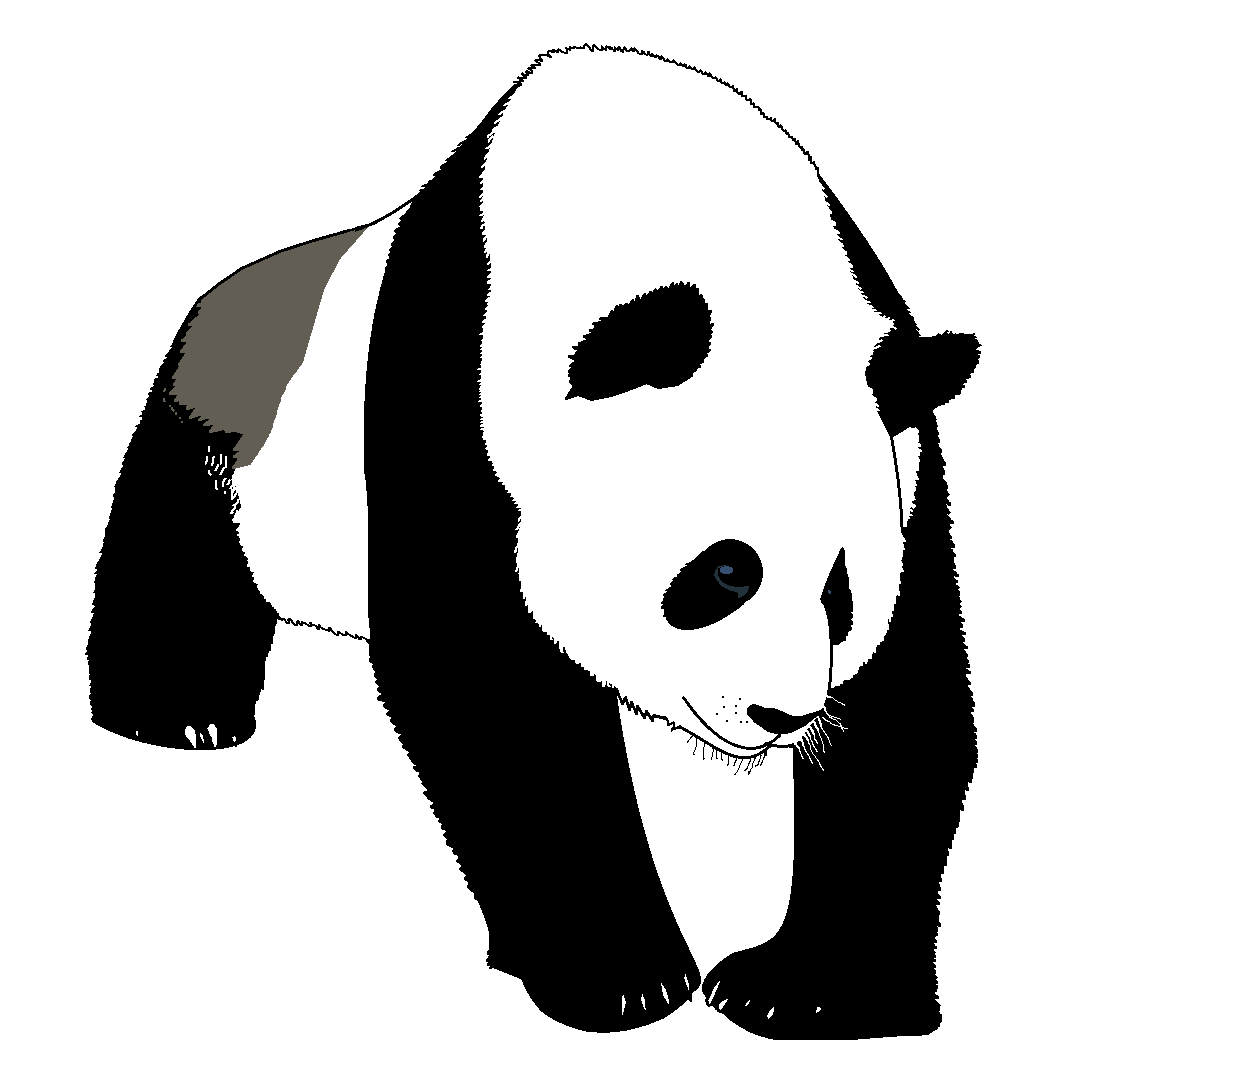 Walking Panda Clipart Transparent PNG Hd, Pandas Walking Forward, Panda  Clipart, Clipart Panda, Realism PNG Image For Free Download